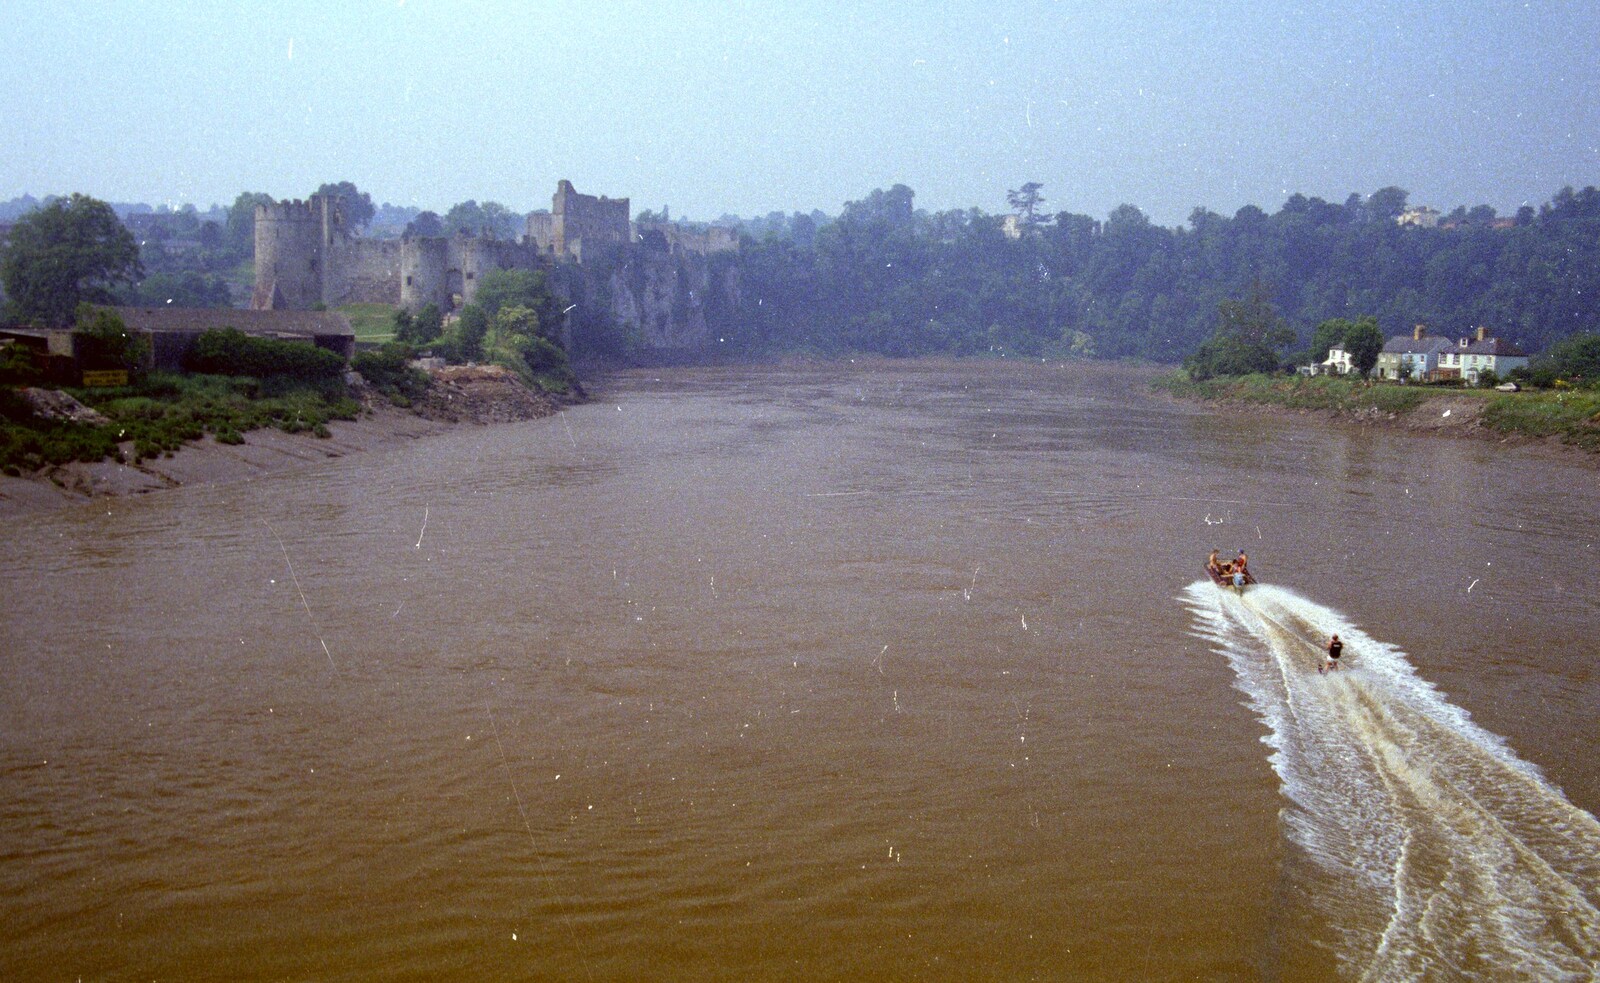 A waterskier steams up the River Wye from A Trip to Chepstow, Monmouthshire, Wales - 5th July 1986